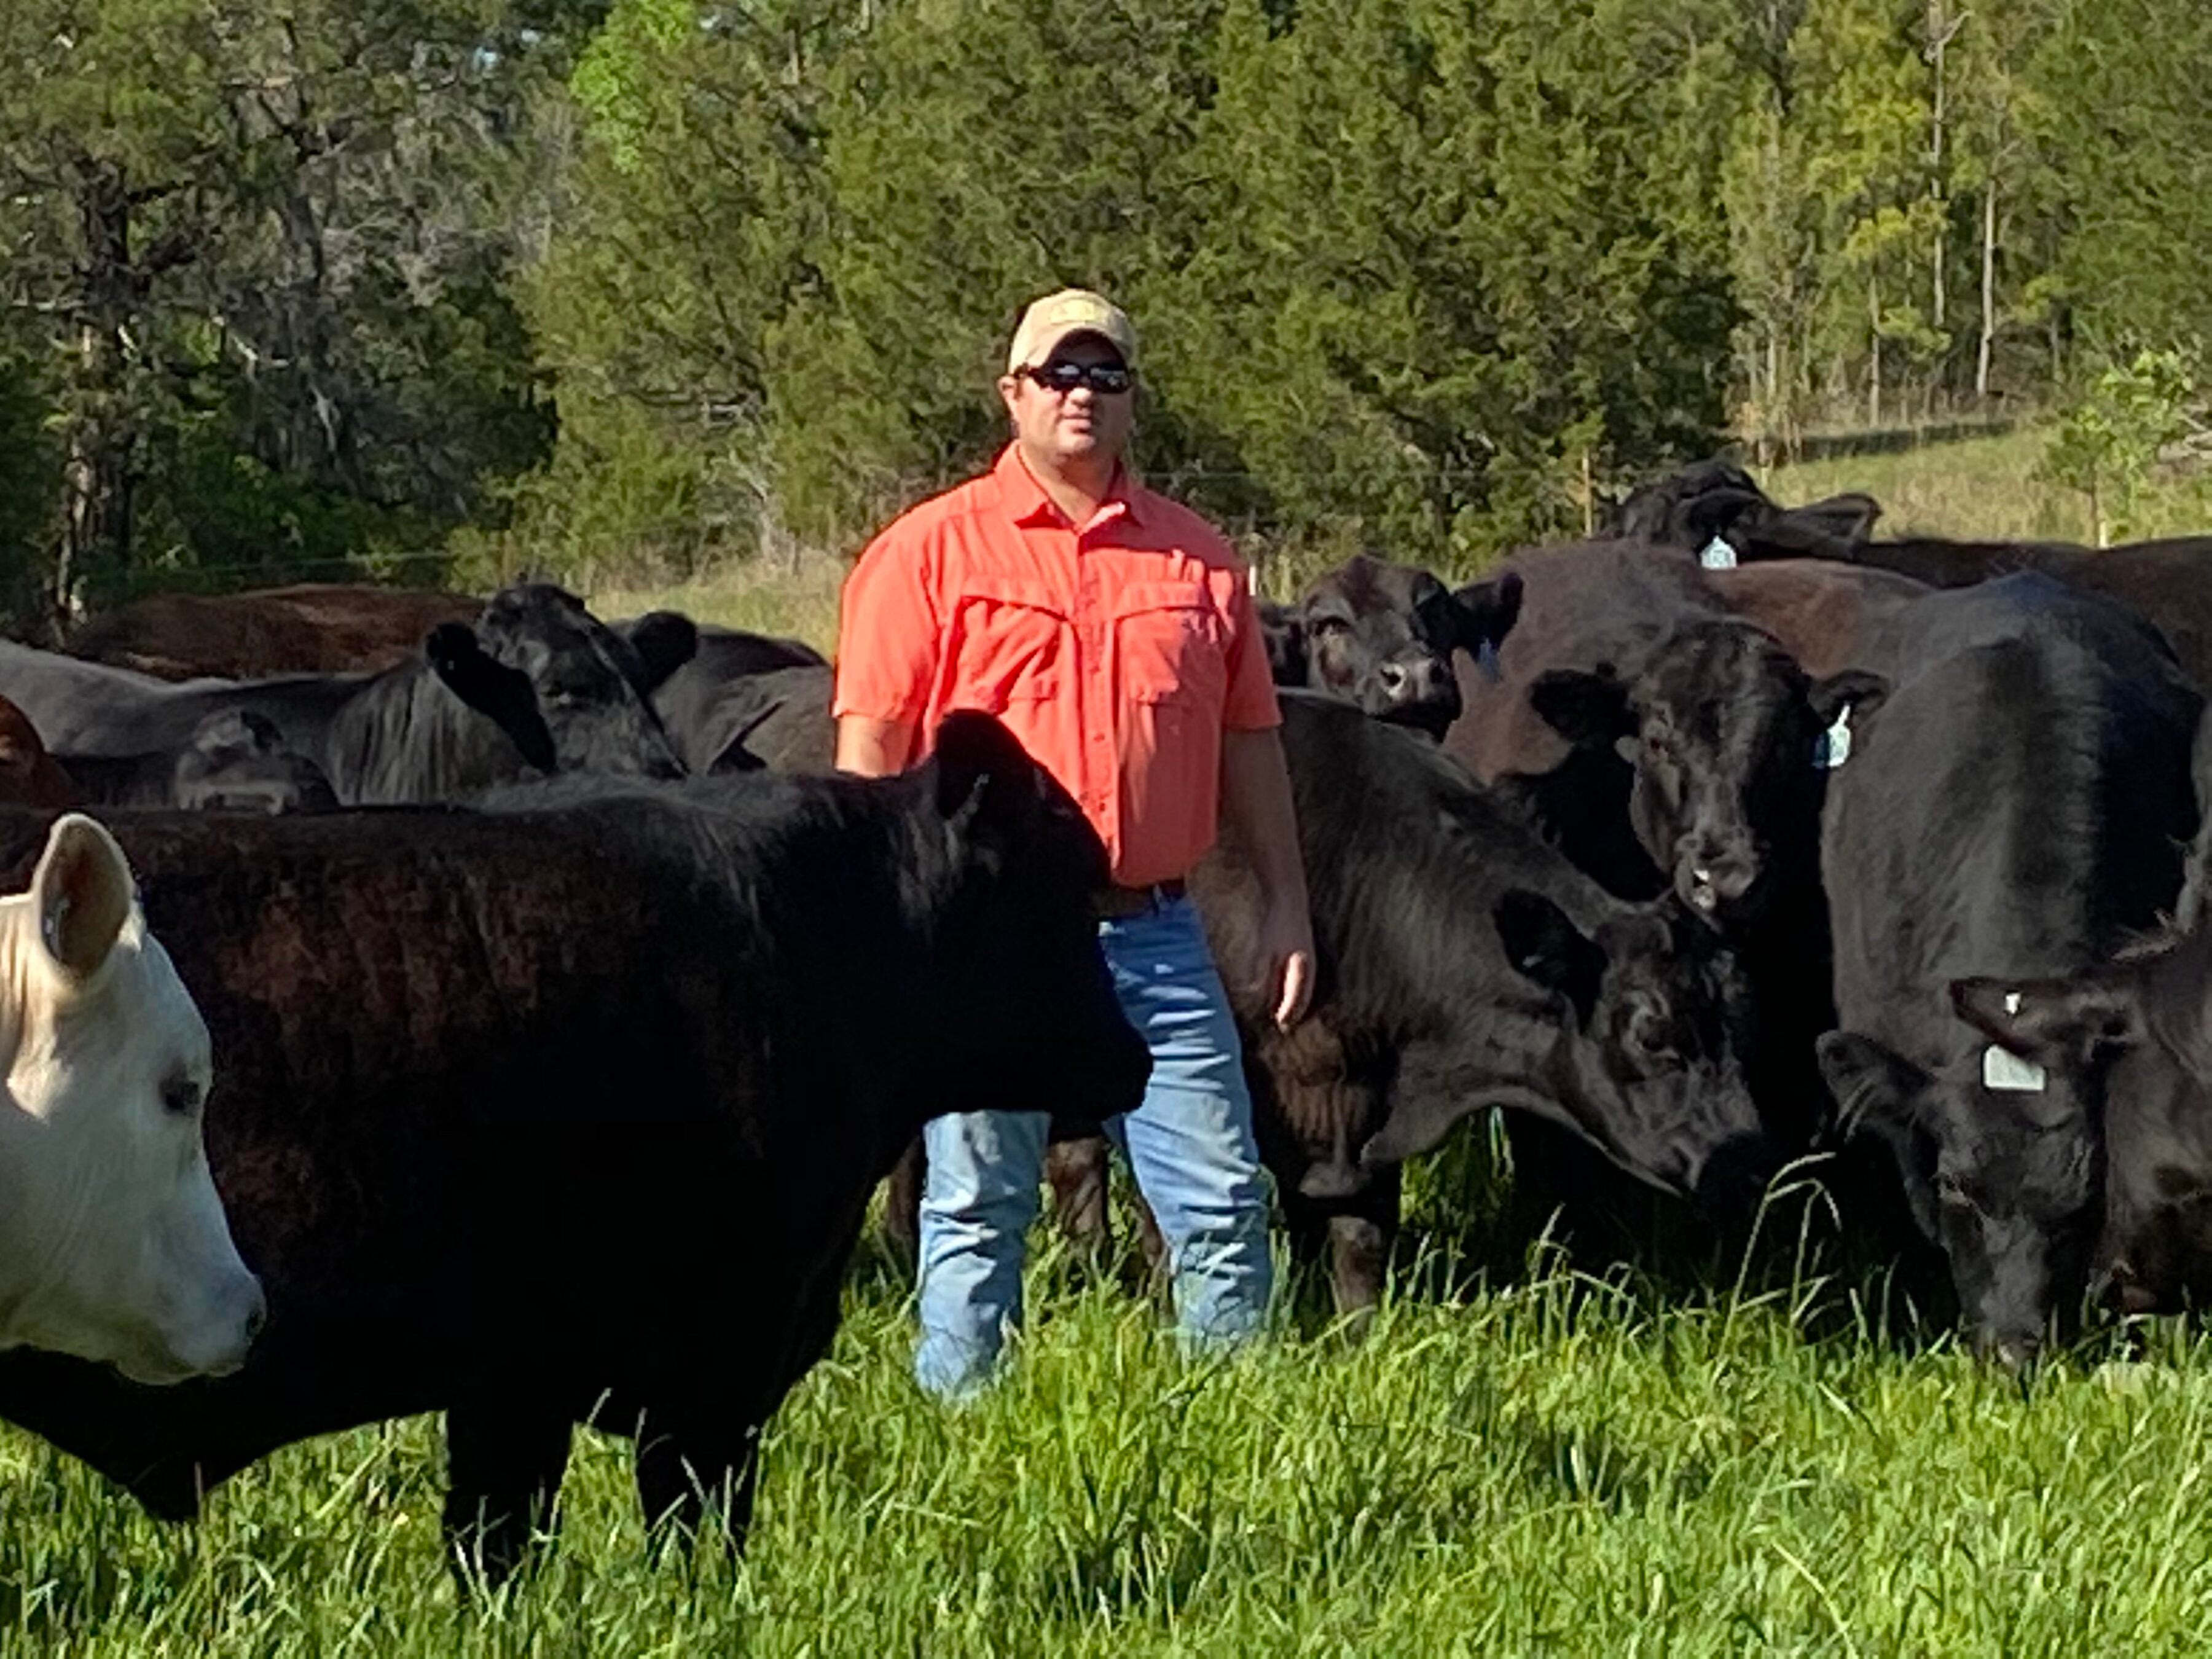 Man in orange shirt and cap poses with beef cattle